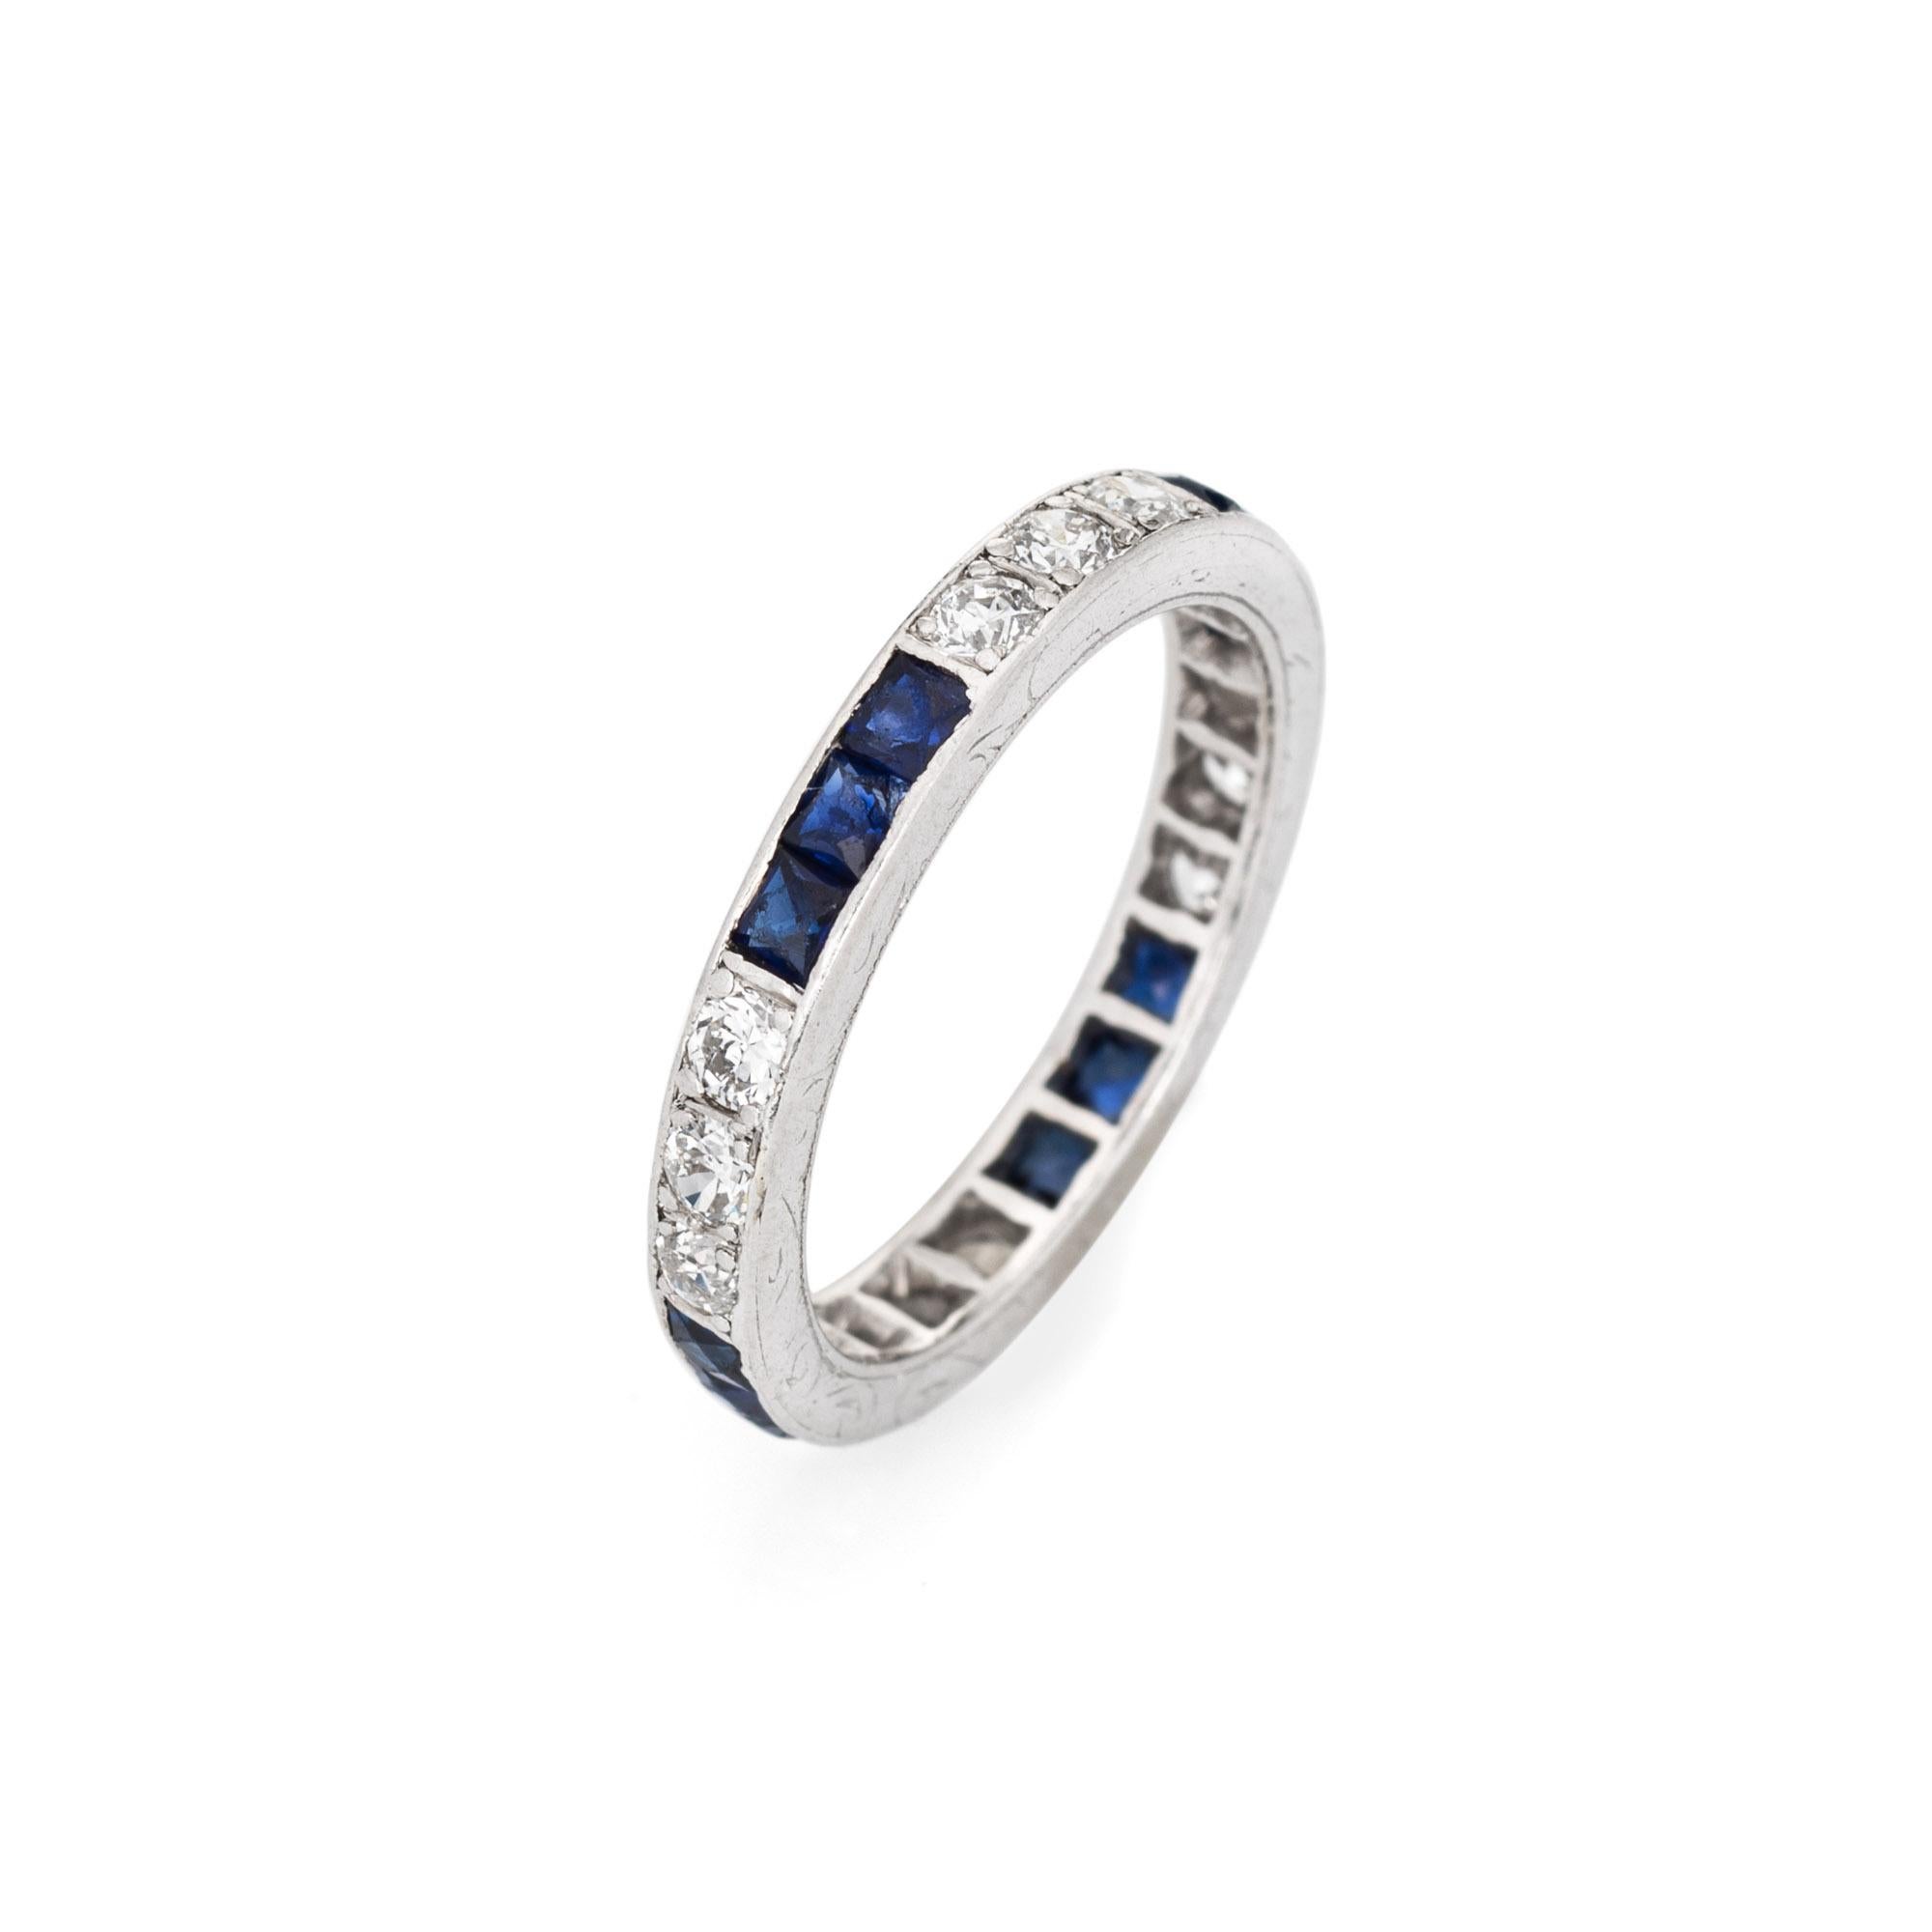 Finely detailed vintage Art Deco diamond & sapphire eternity band (circa 1920s to 1930s) crafted in 900 platinum. 

12 old European cut diamonds total an estimated 0.36 carats (estimated at I-J color and SI1-2 clarity). 12 French cut sapphires total